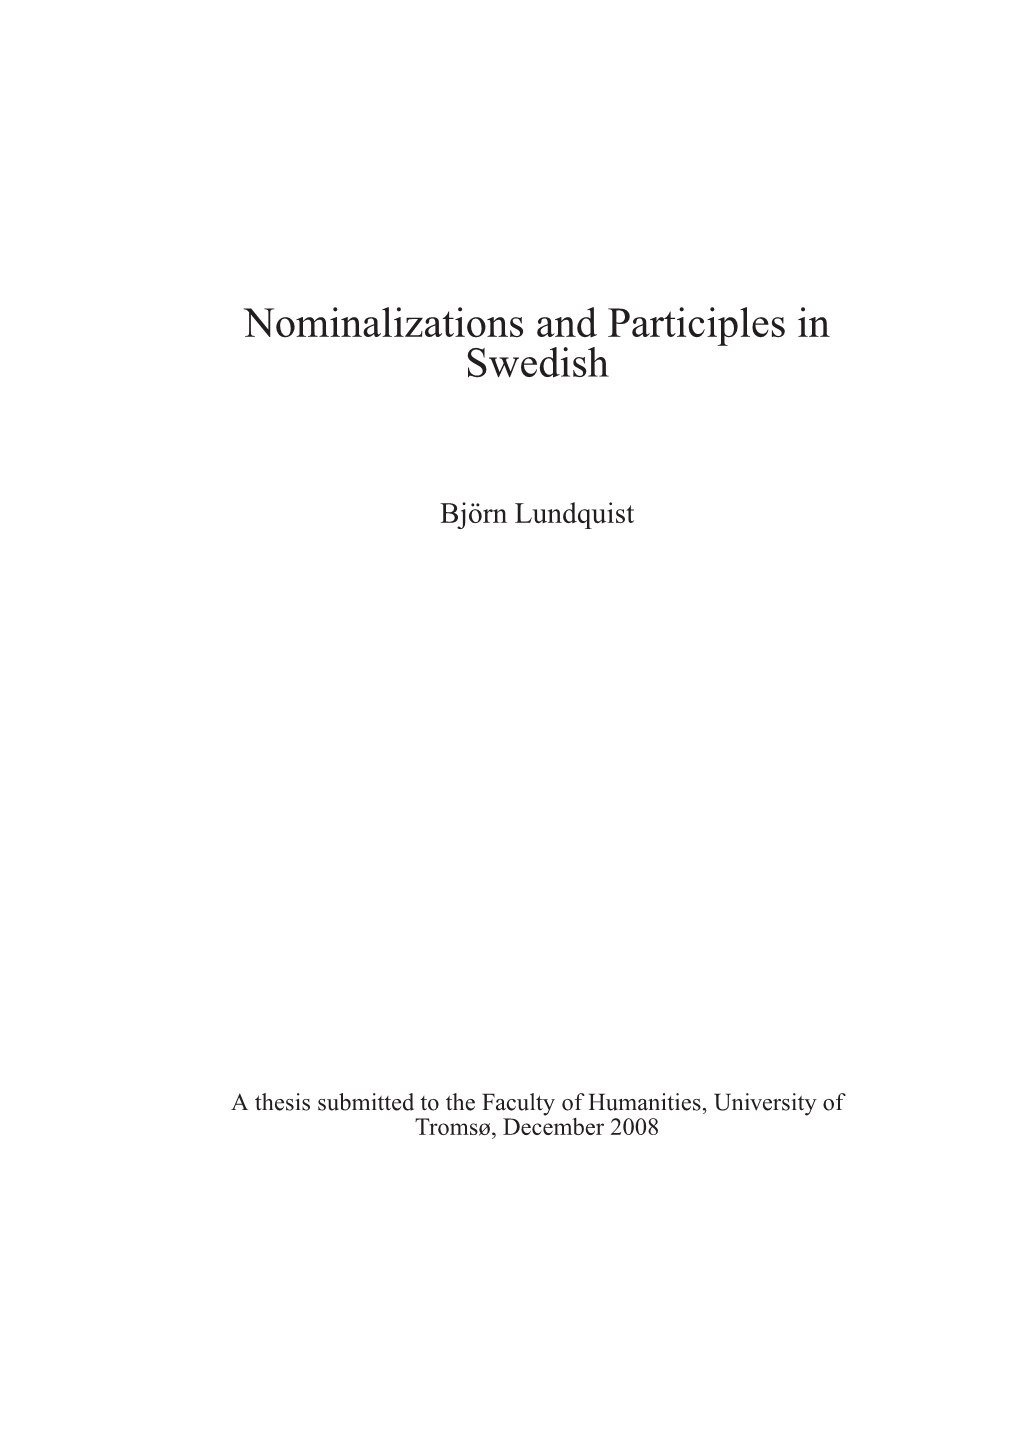 Nominalizations and Participles in Swedish